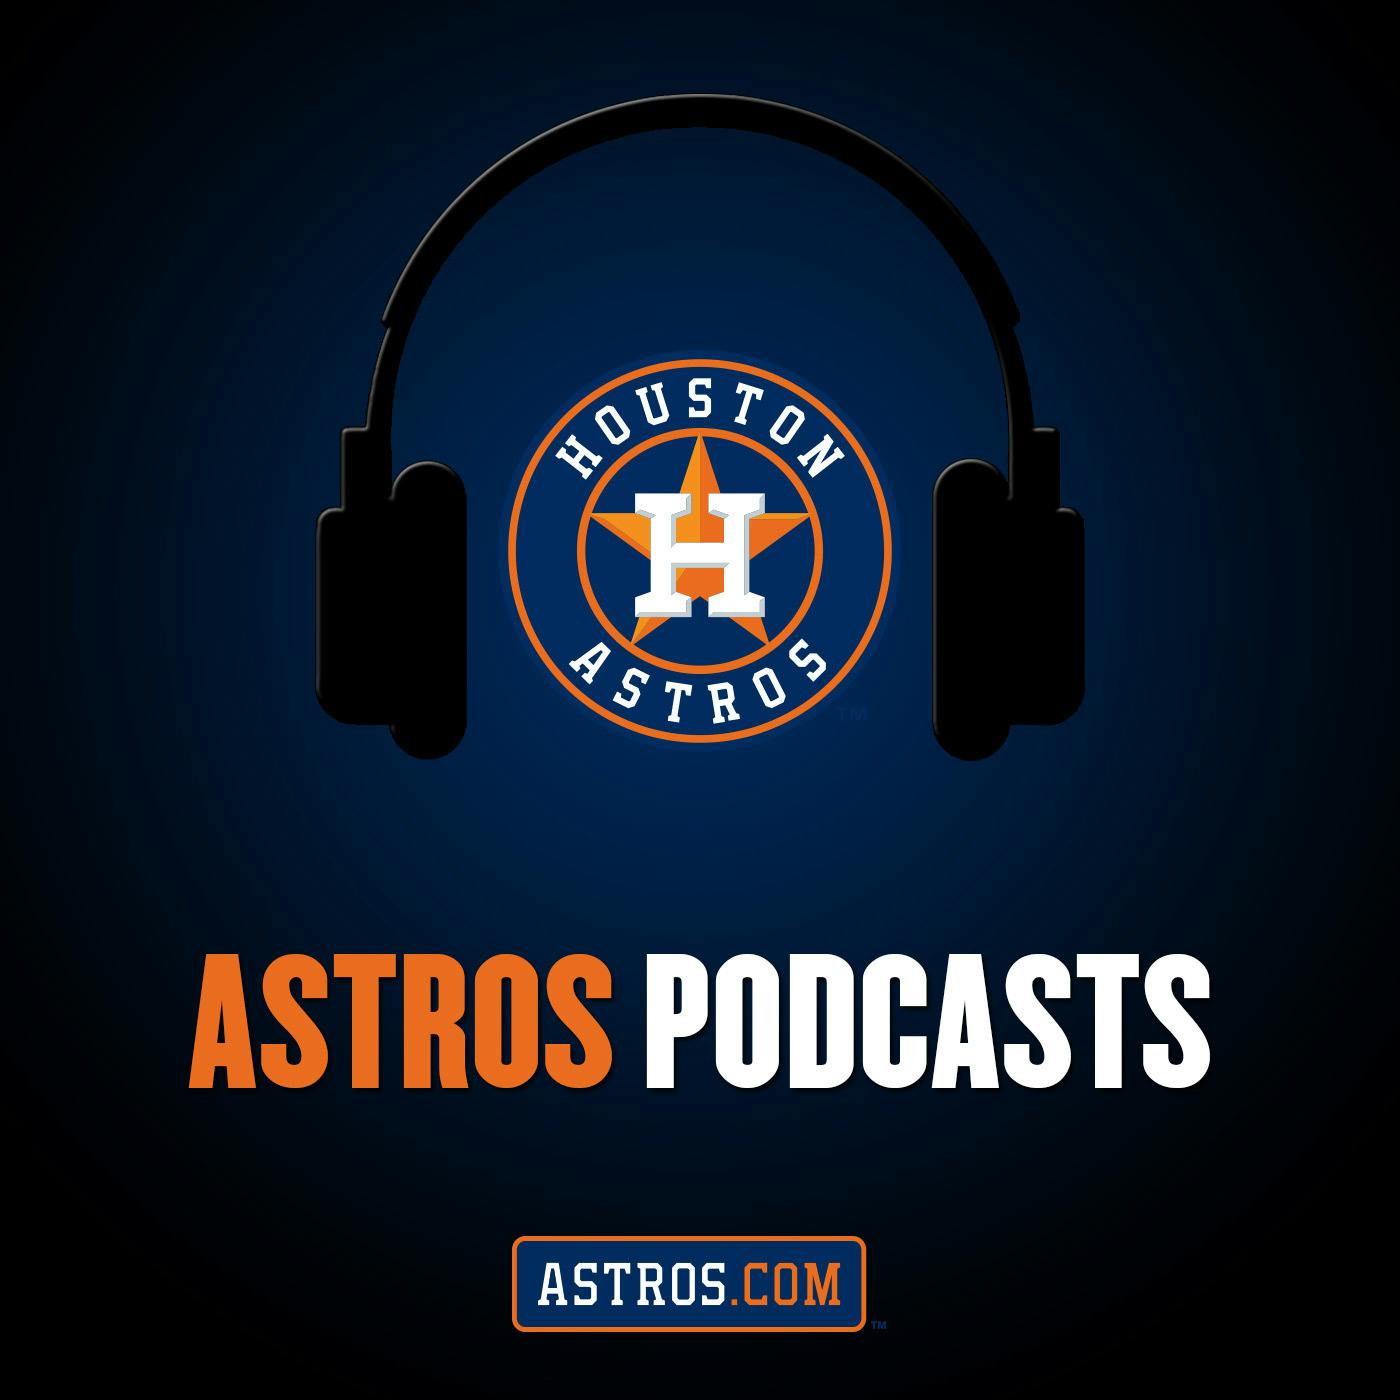 3/7 SPRING TRAINING PODCAST: Preview vs St. Louis, Steve Sparks, Brian McTaggart, Mike Coffin